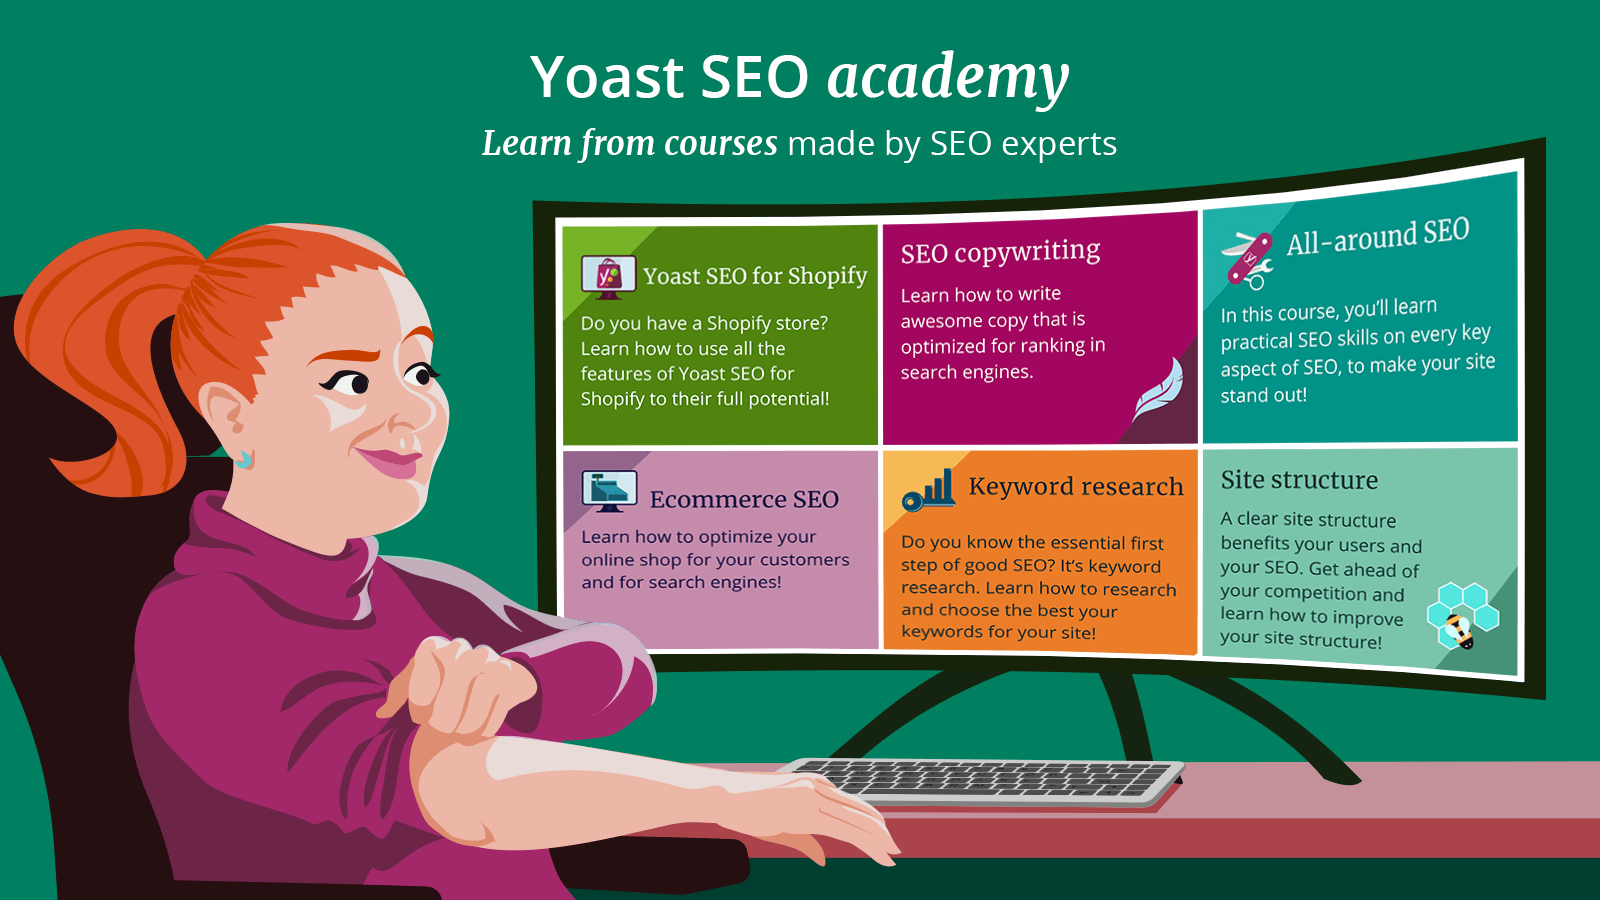 Get multiple academy courses to learn about SEO